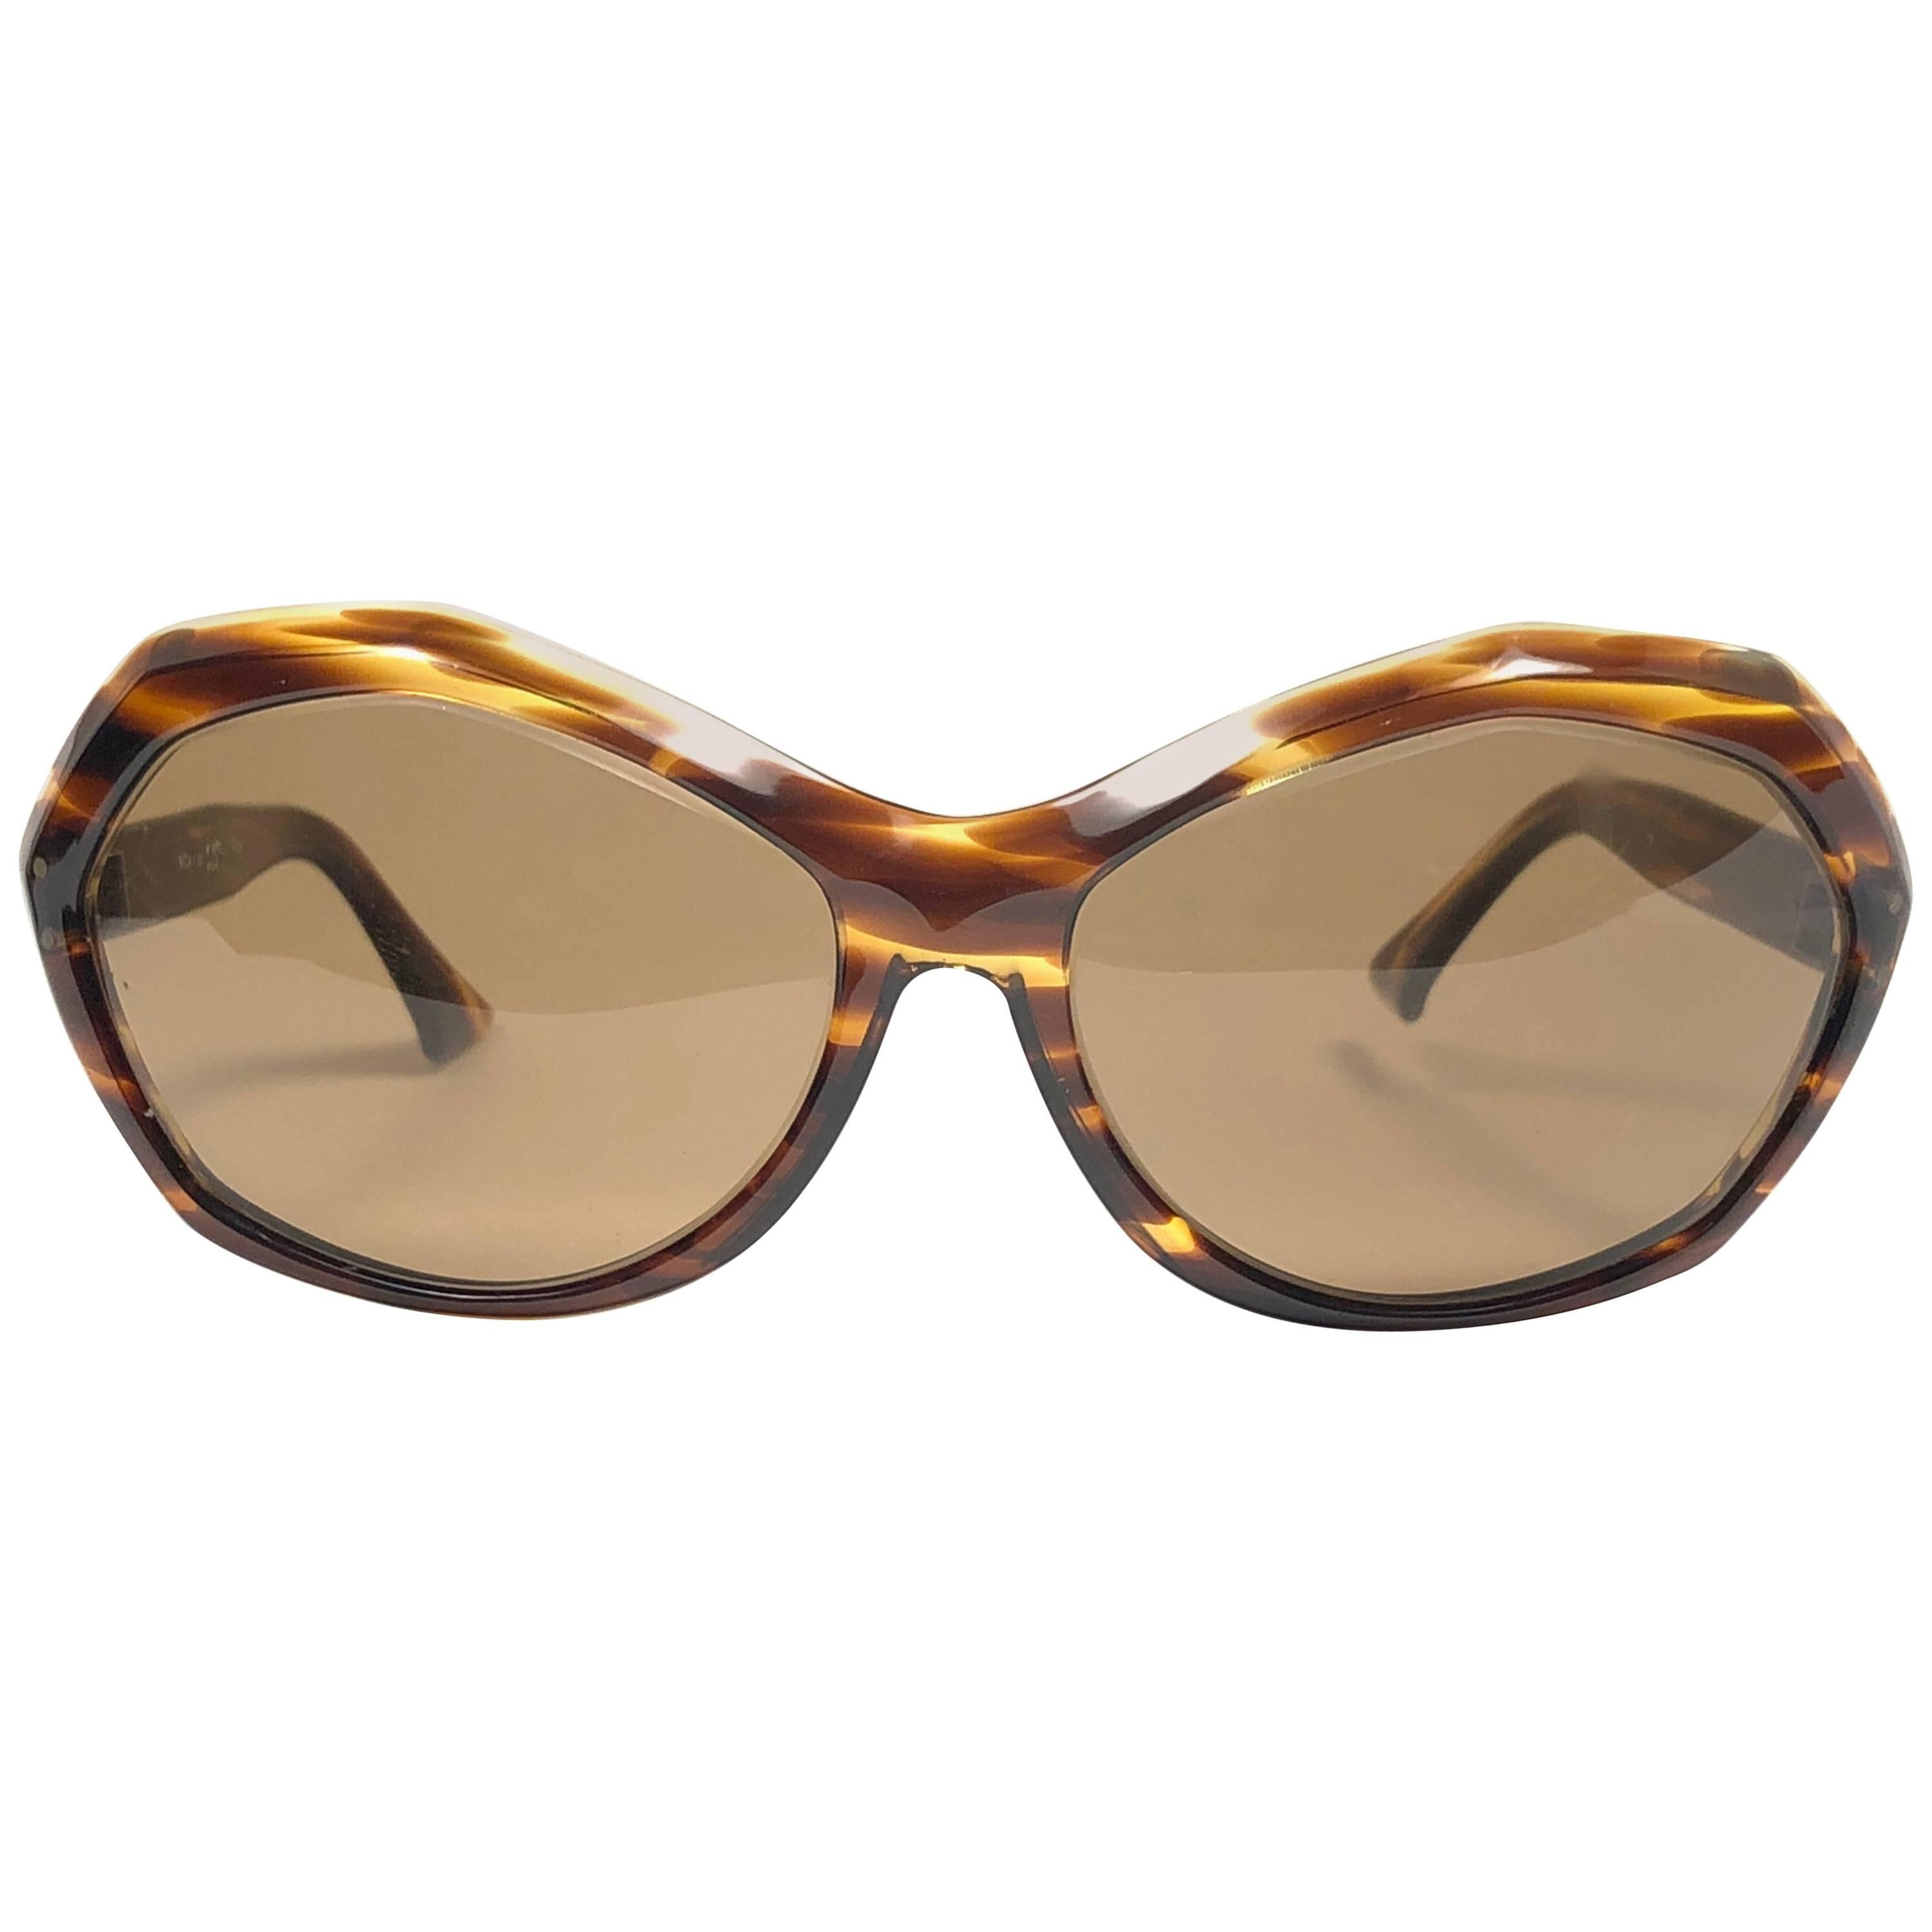 New Vintage Rare Pierre Marly Nicky Oversized Avantgarde 1960 Sunglasses For Sale